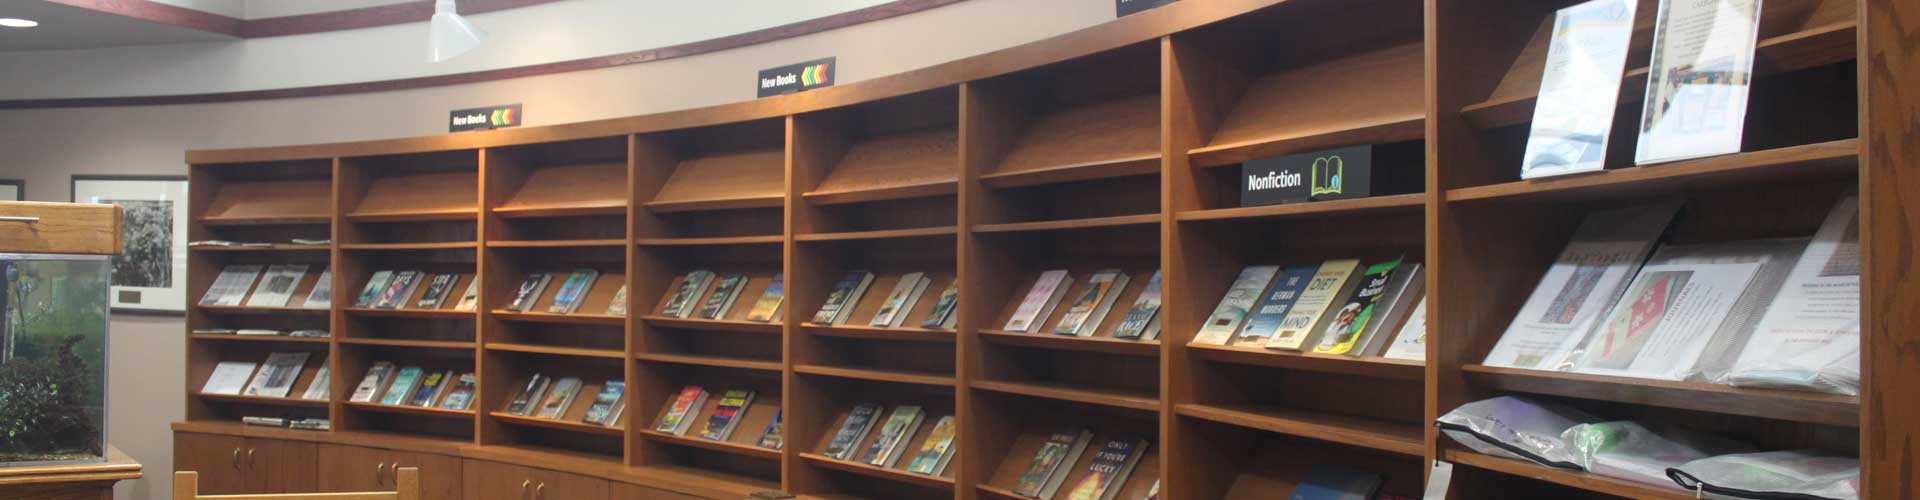 New Book Shelf Section for Fontana Library